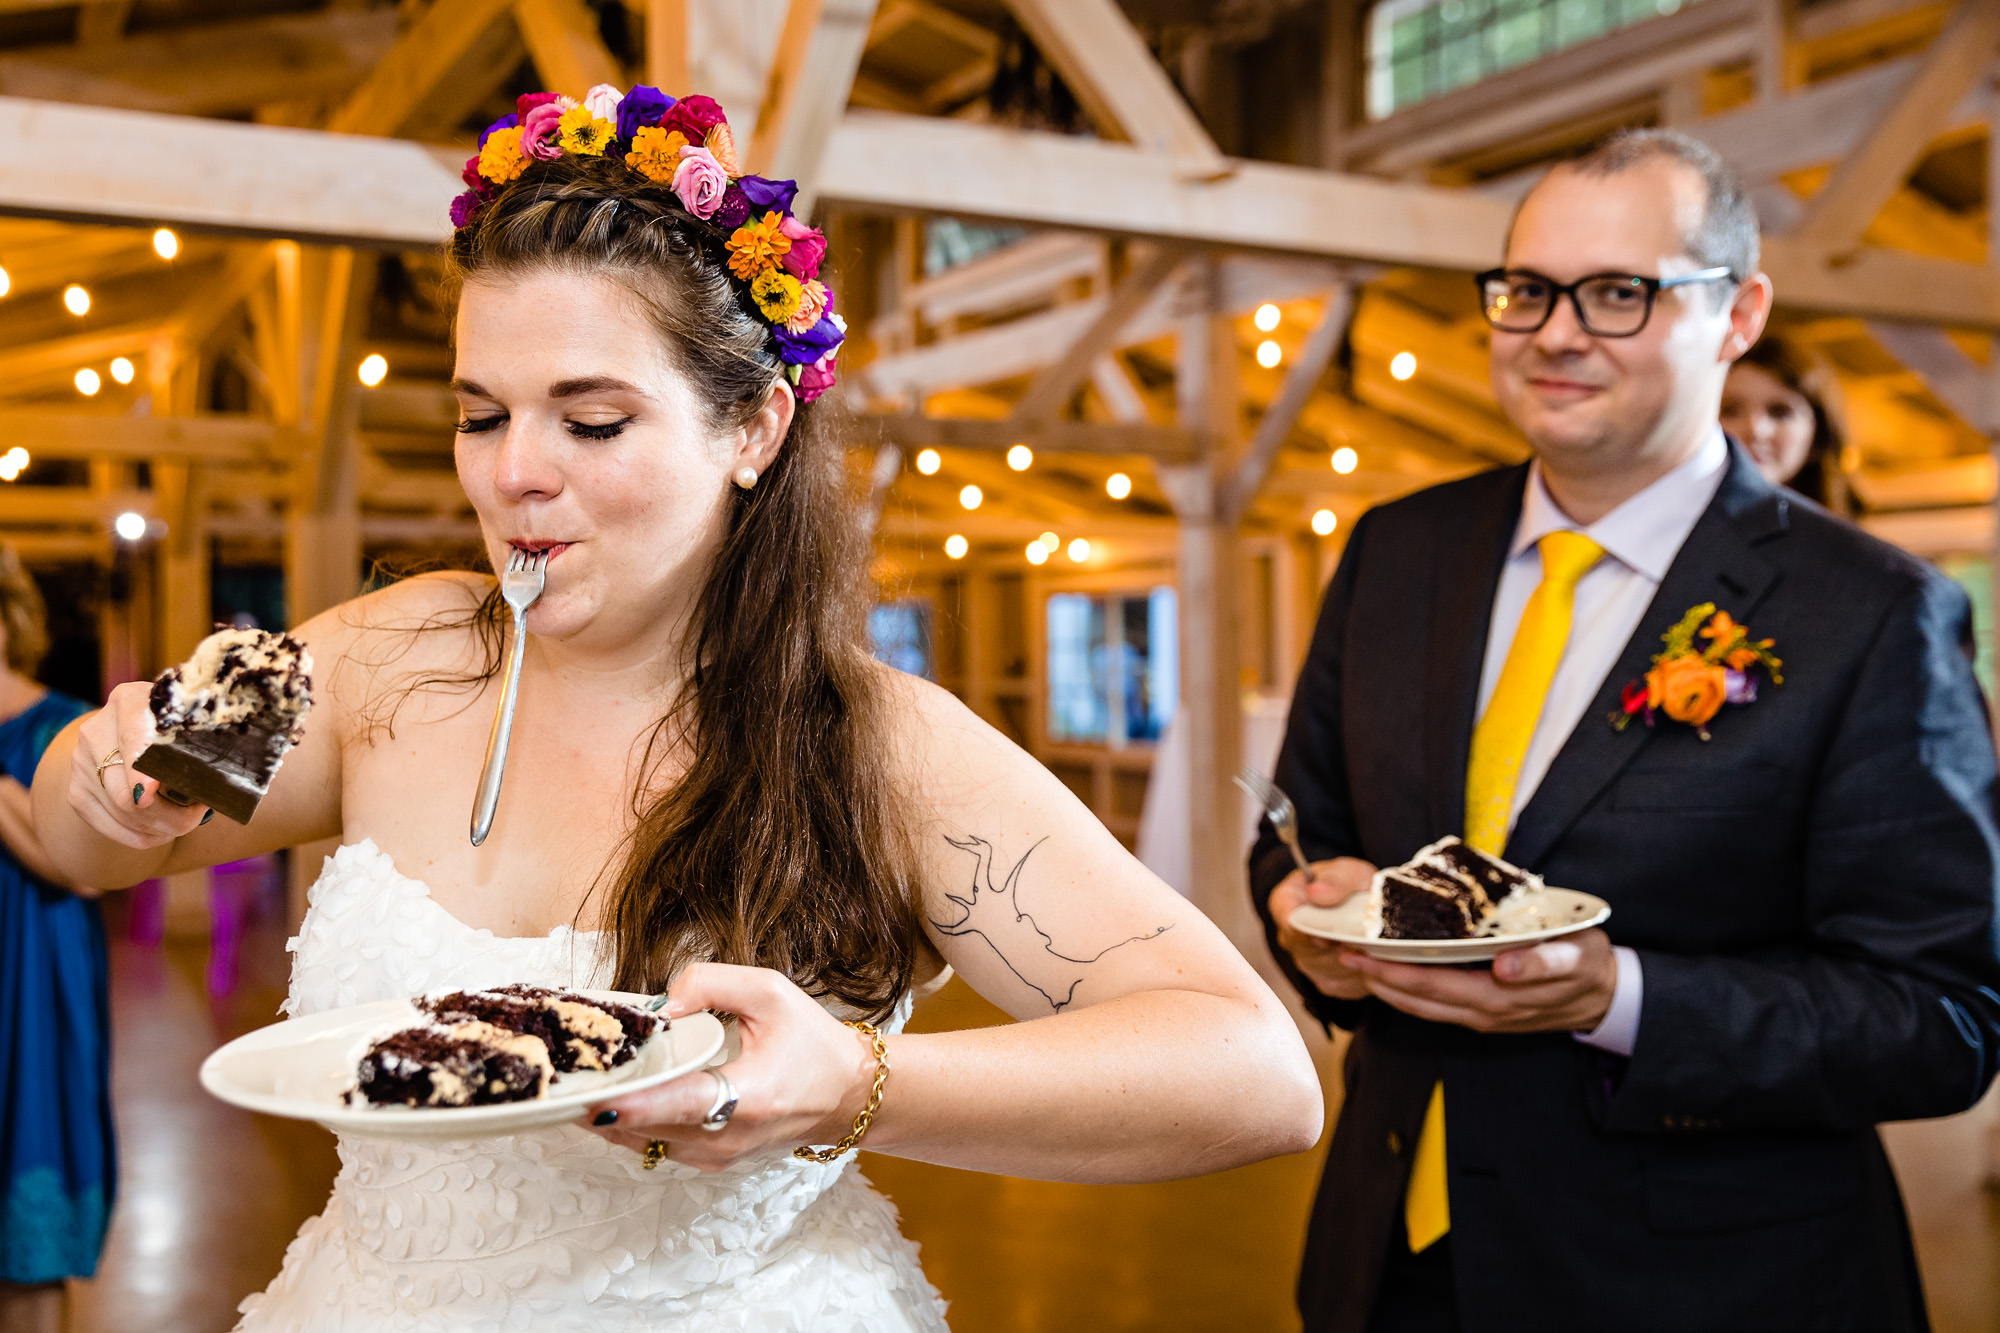 A cake cutting at a wedding in a barn in Maine